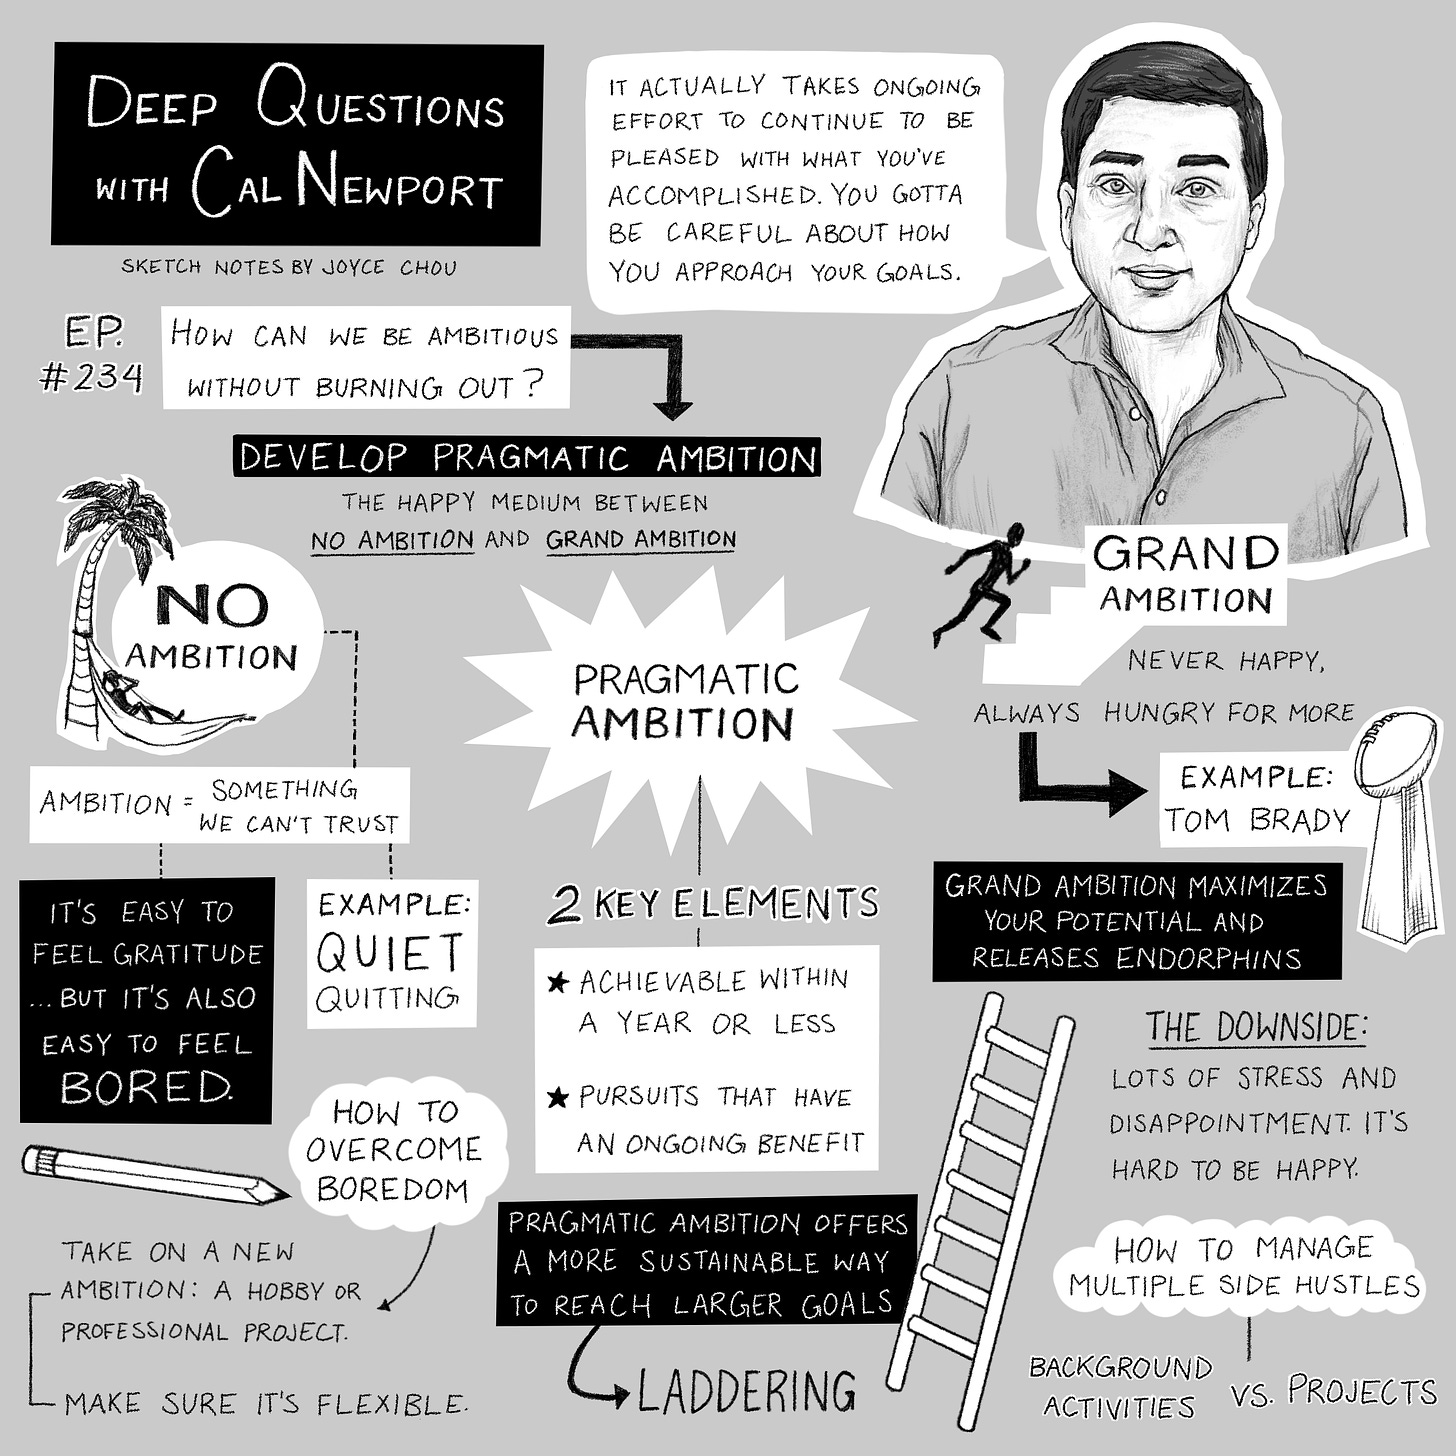 visual notes about episode #234 of Deep Questions with Cal Newport